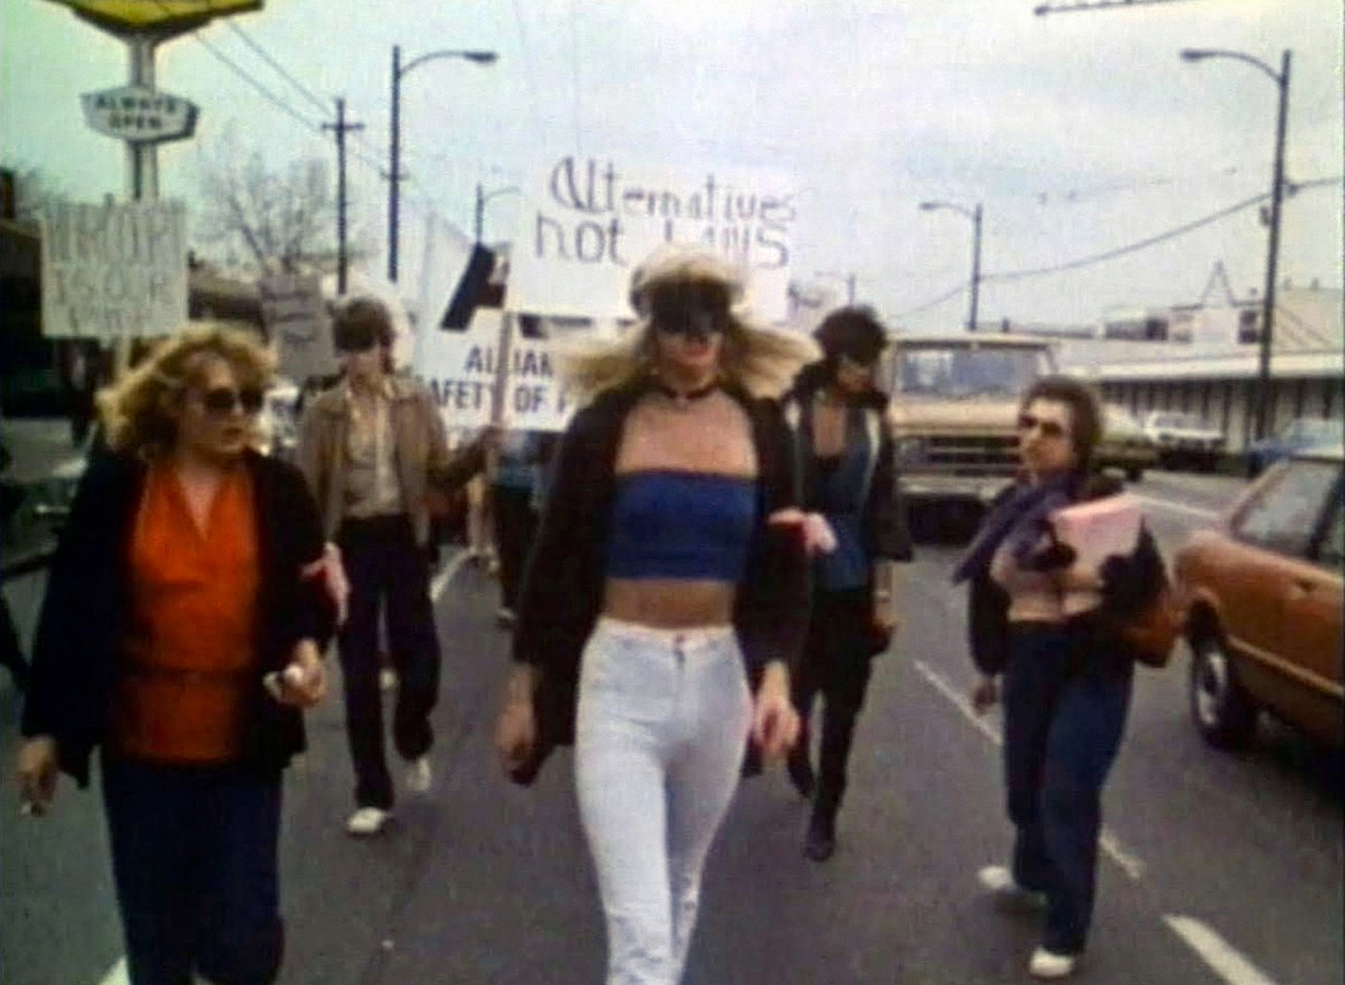 Canada's 1st Modern-Day Protest: Alliance for the Safety of Prostitutes Broadway Street Vancouver, April 20, 1983. Protests followed a B.C. court injunction to move the sex workers out of Vancouver's West End. Film still from Hookers on Davie (1984)